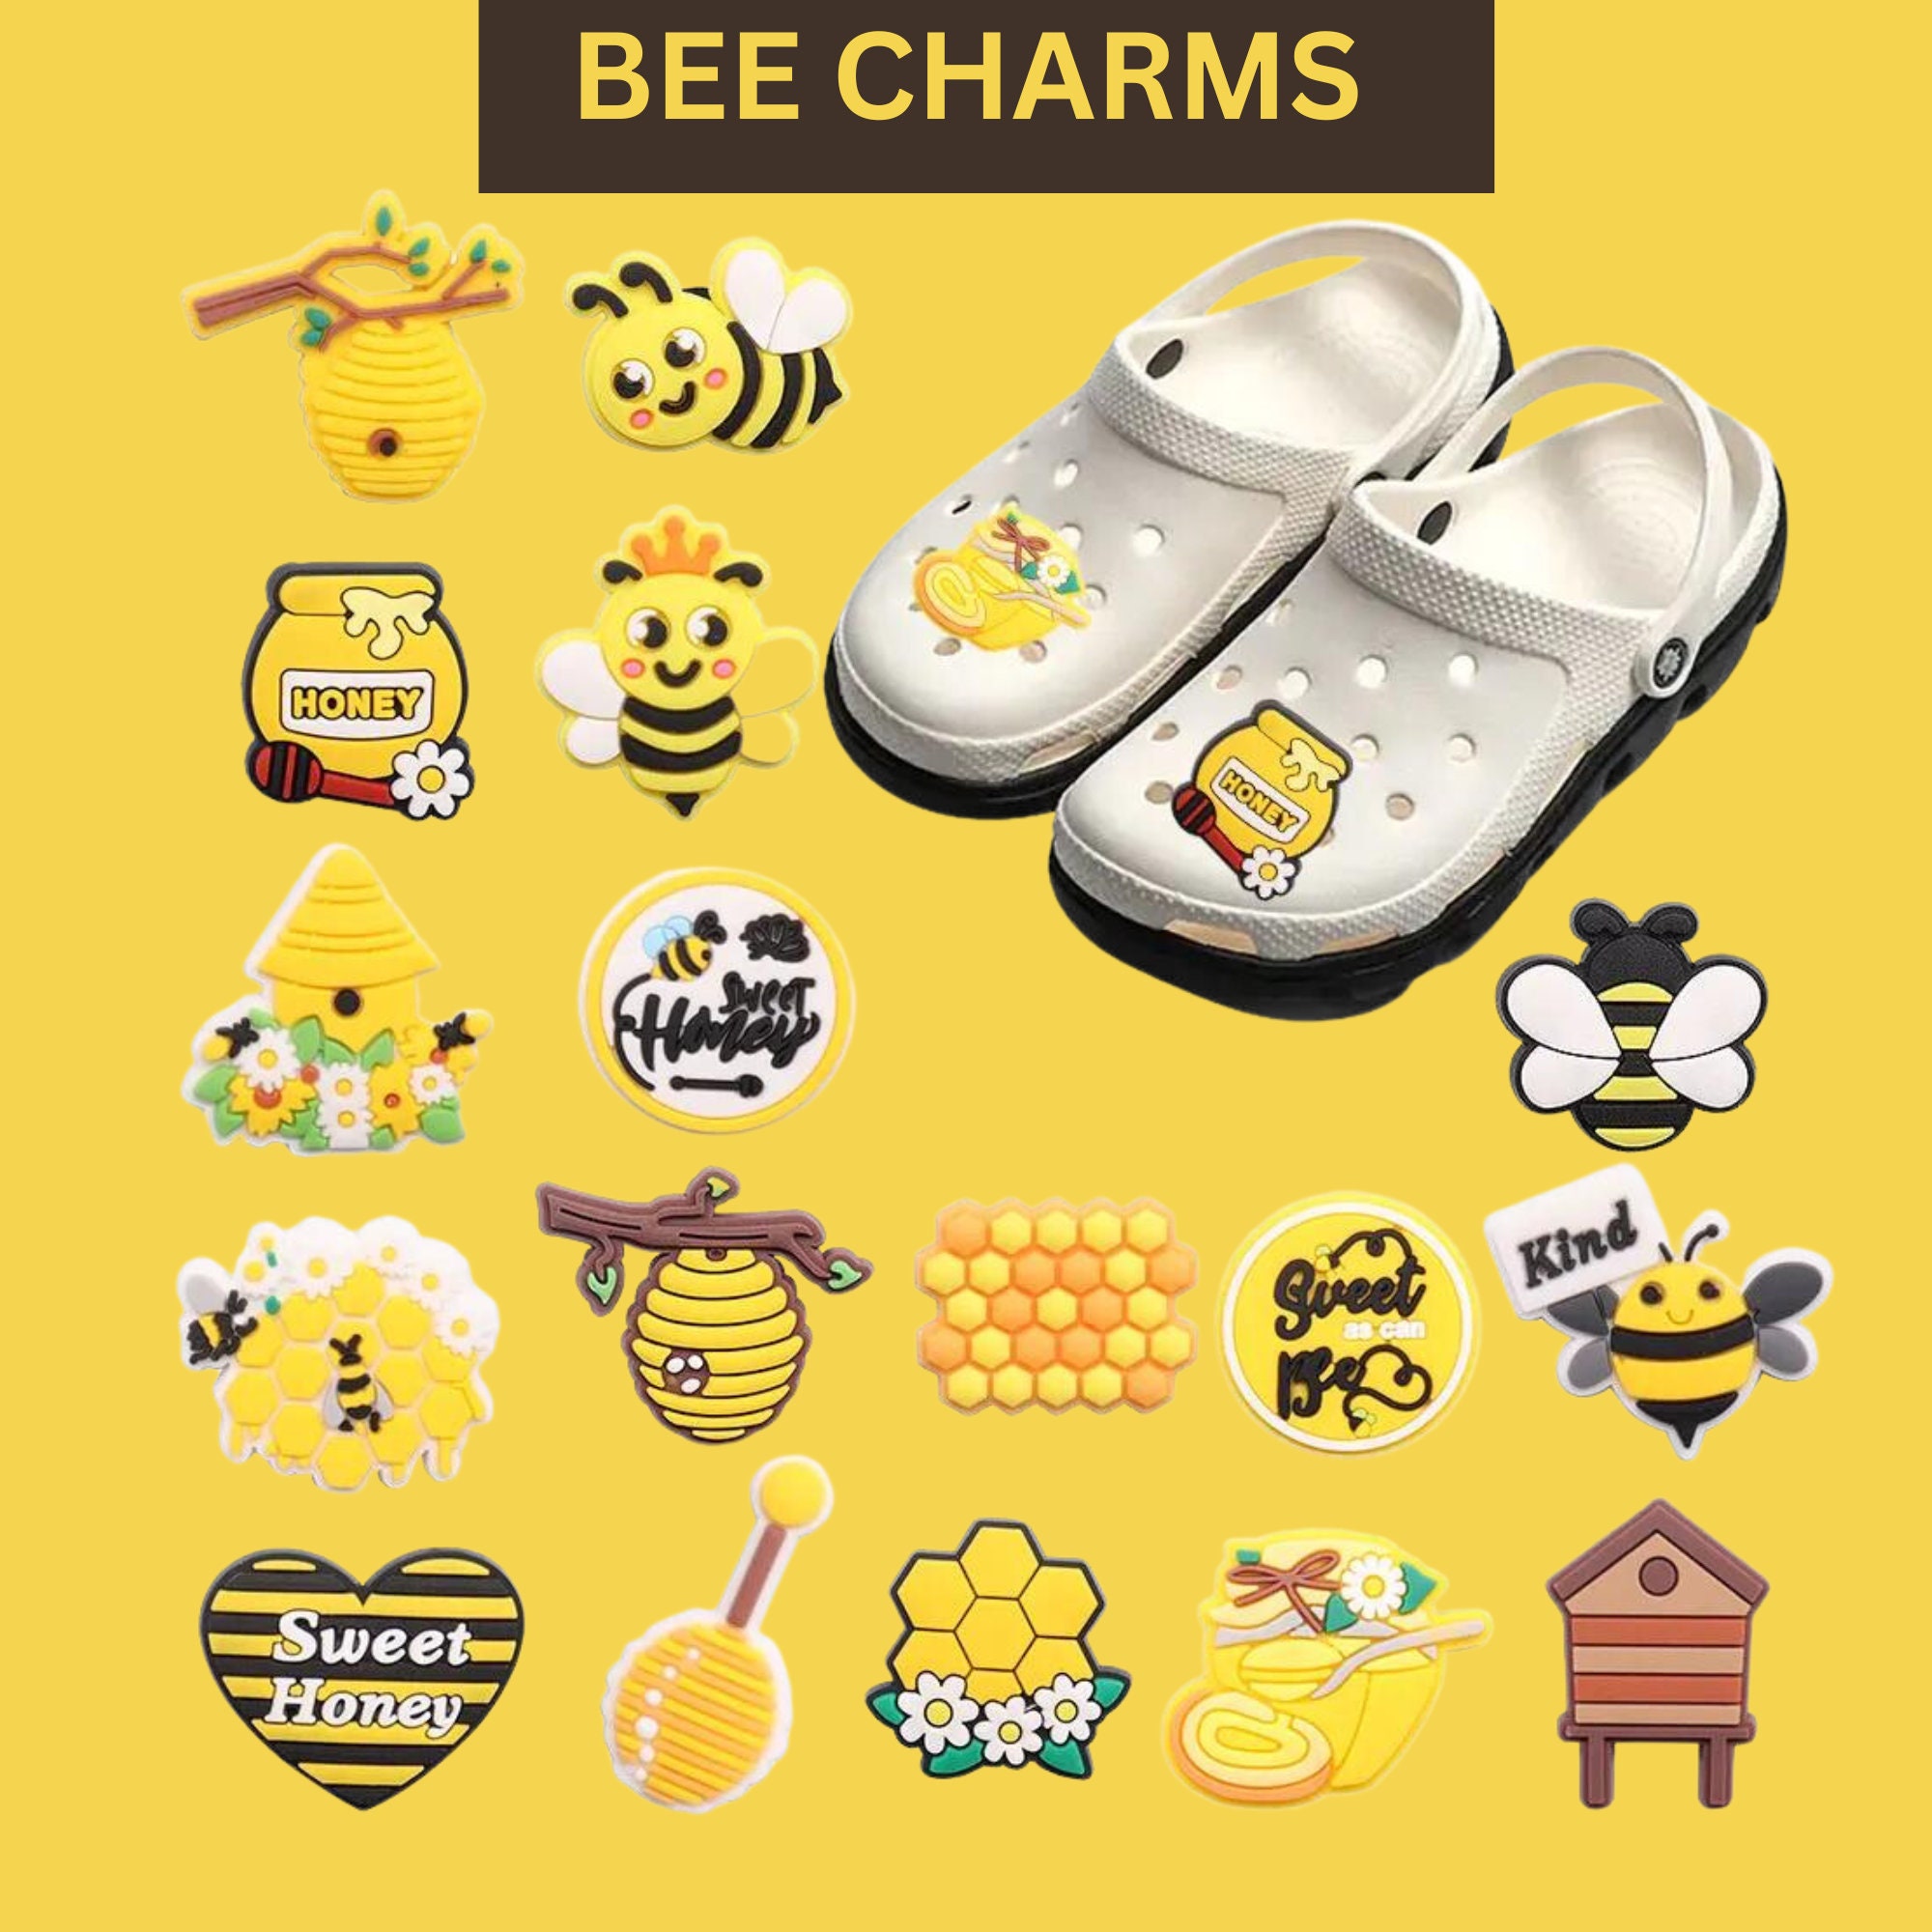 Fohiahfce 25pcs Bee Shoe Charms Fits for Clog Sandals Shoes Decoration, Honey Bumble Bee Accessories Charms for Kids Girls Boys Teens Party Favor